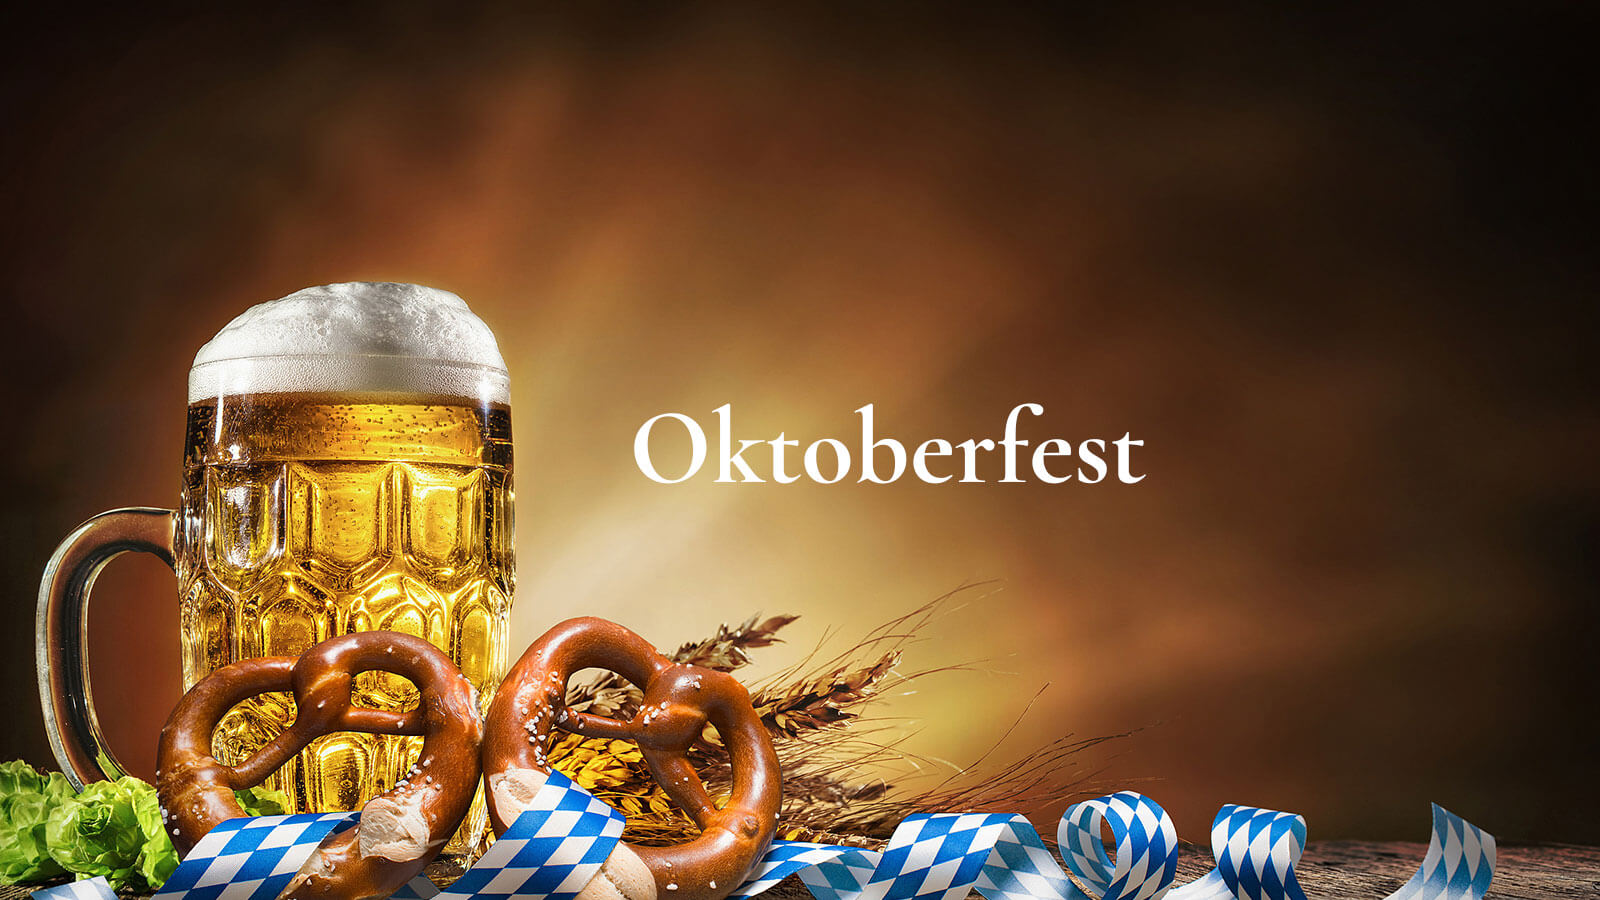 Oktoberfest,Beer,With,Pretzel,,Wheat,And,Hops,On,Wooden,Table